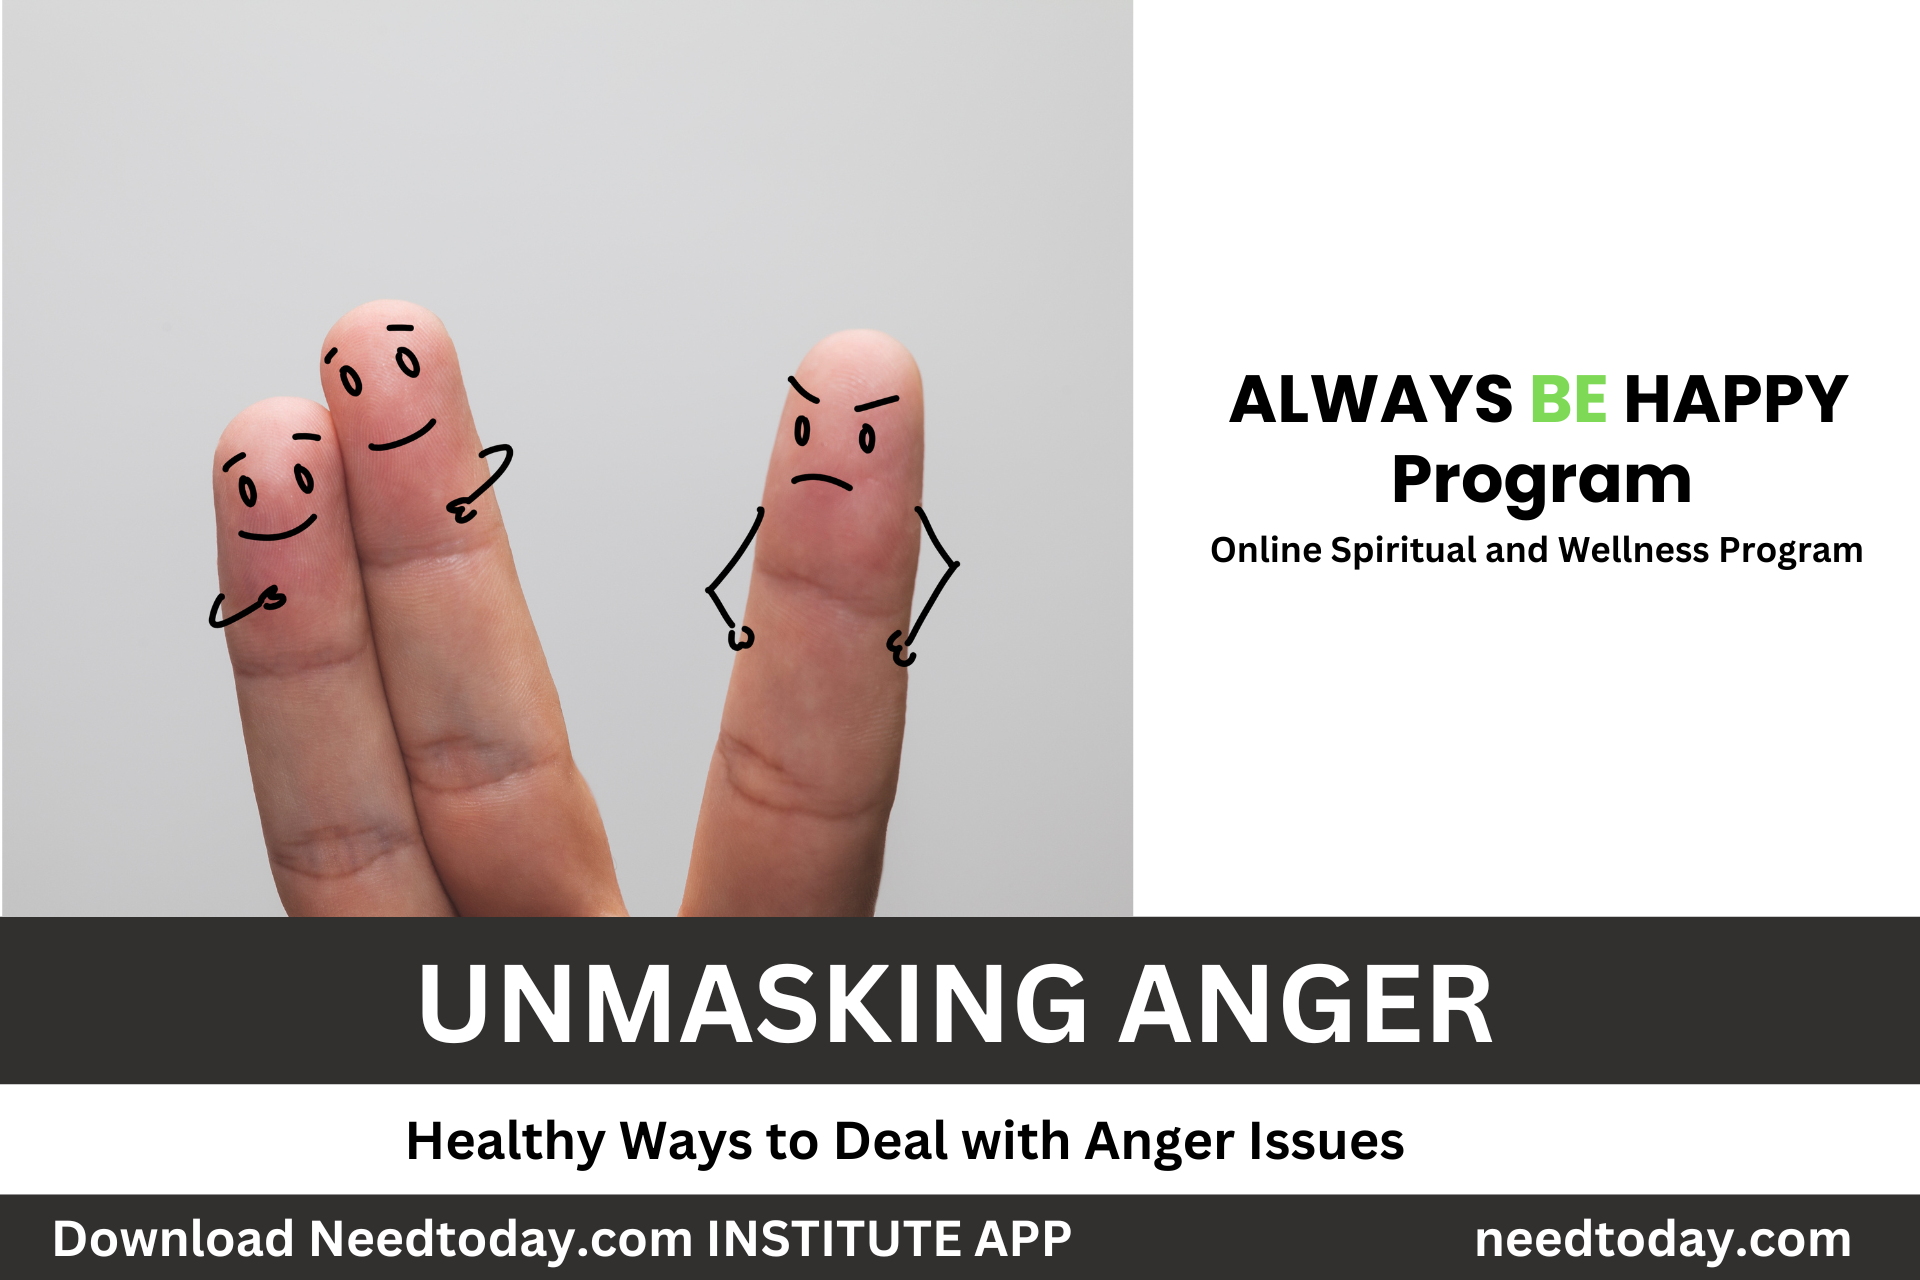 Unmasking Anger: Healthy Ways to Deal with Anger Issues